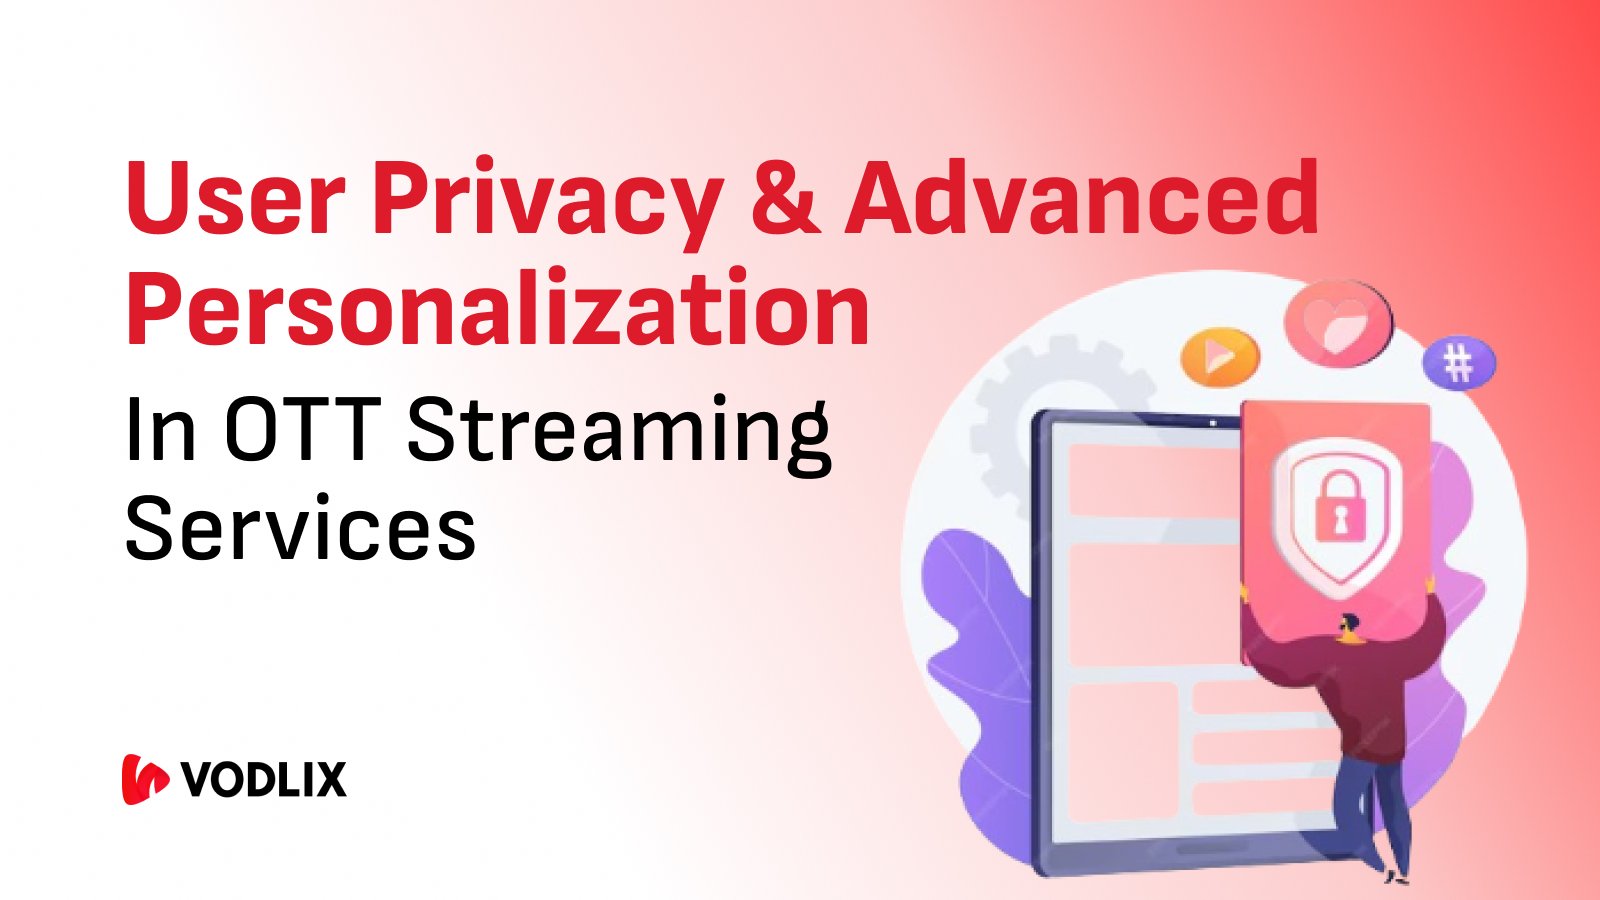 User Privacy and Advanced Personalization in OTT Streaming Services